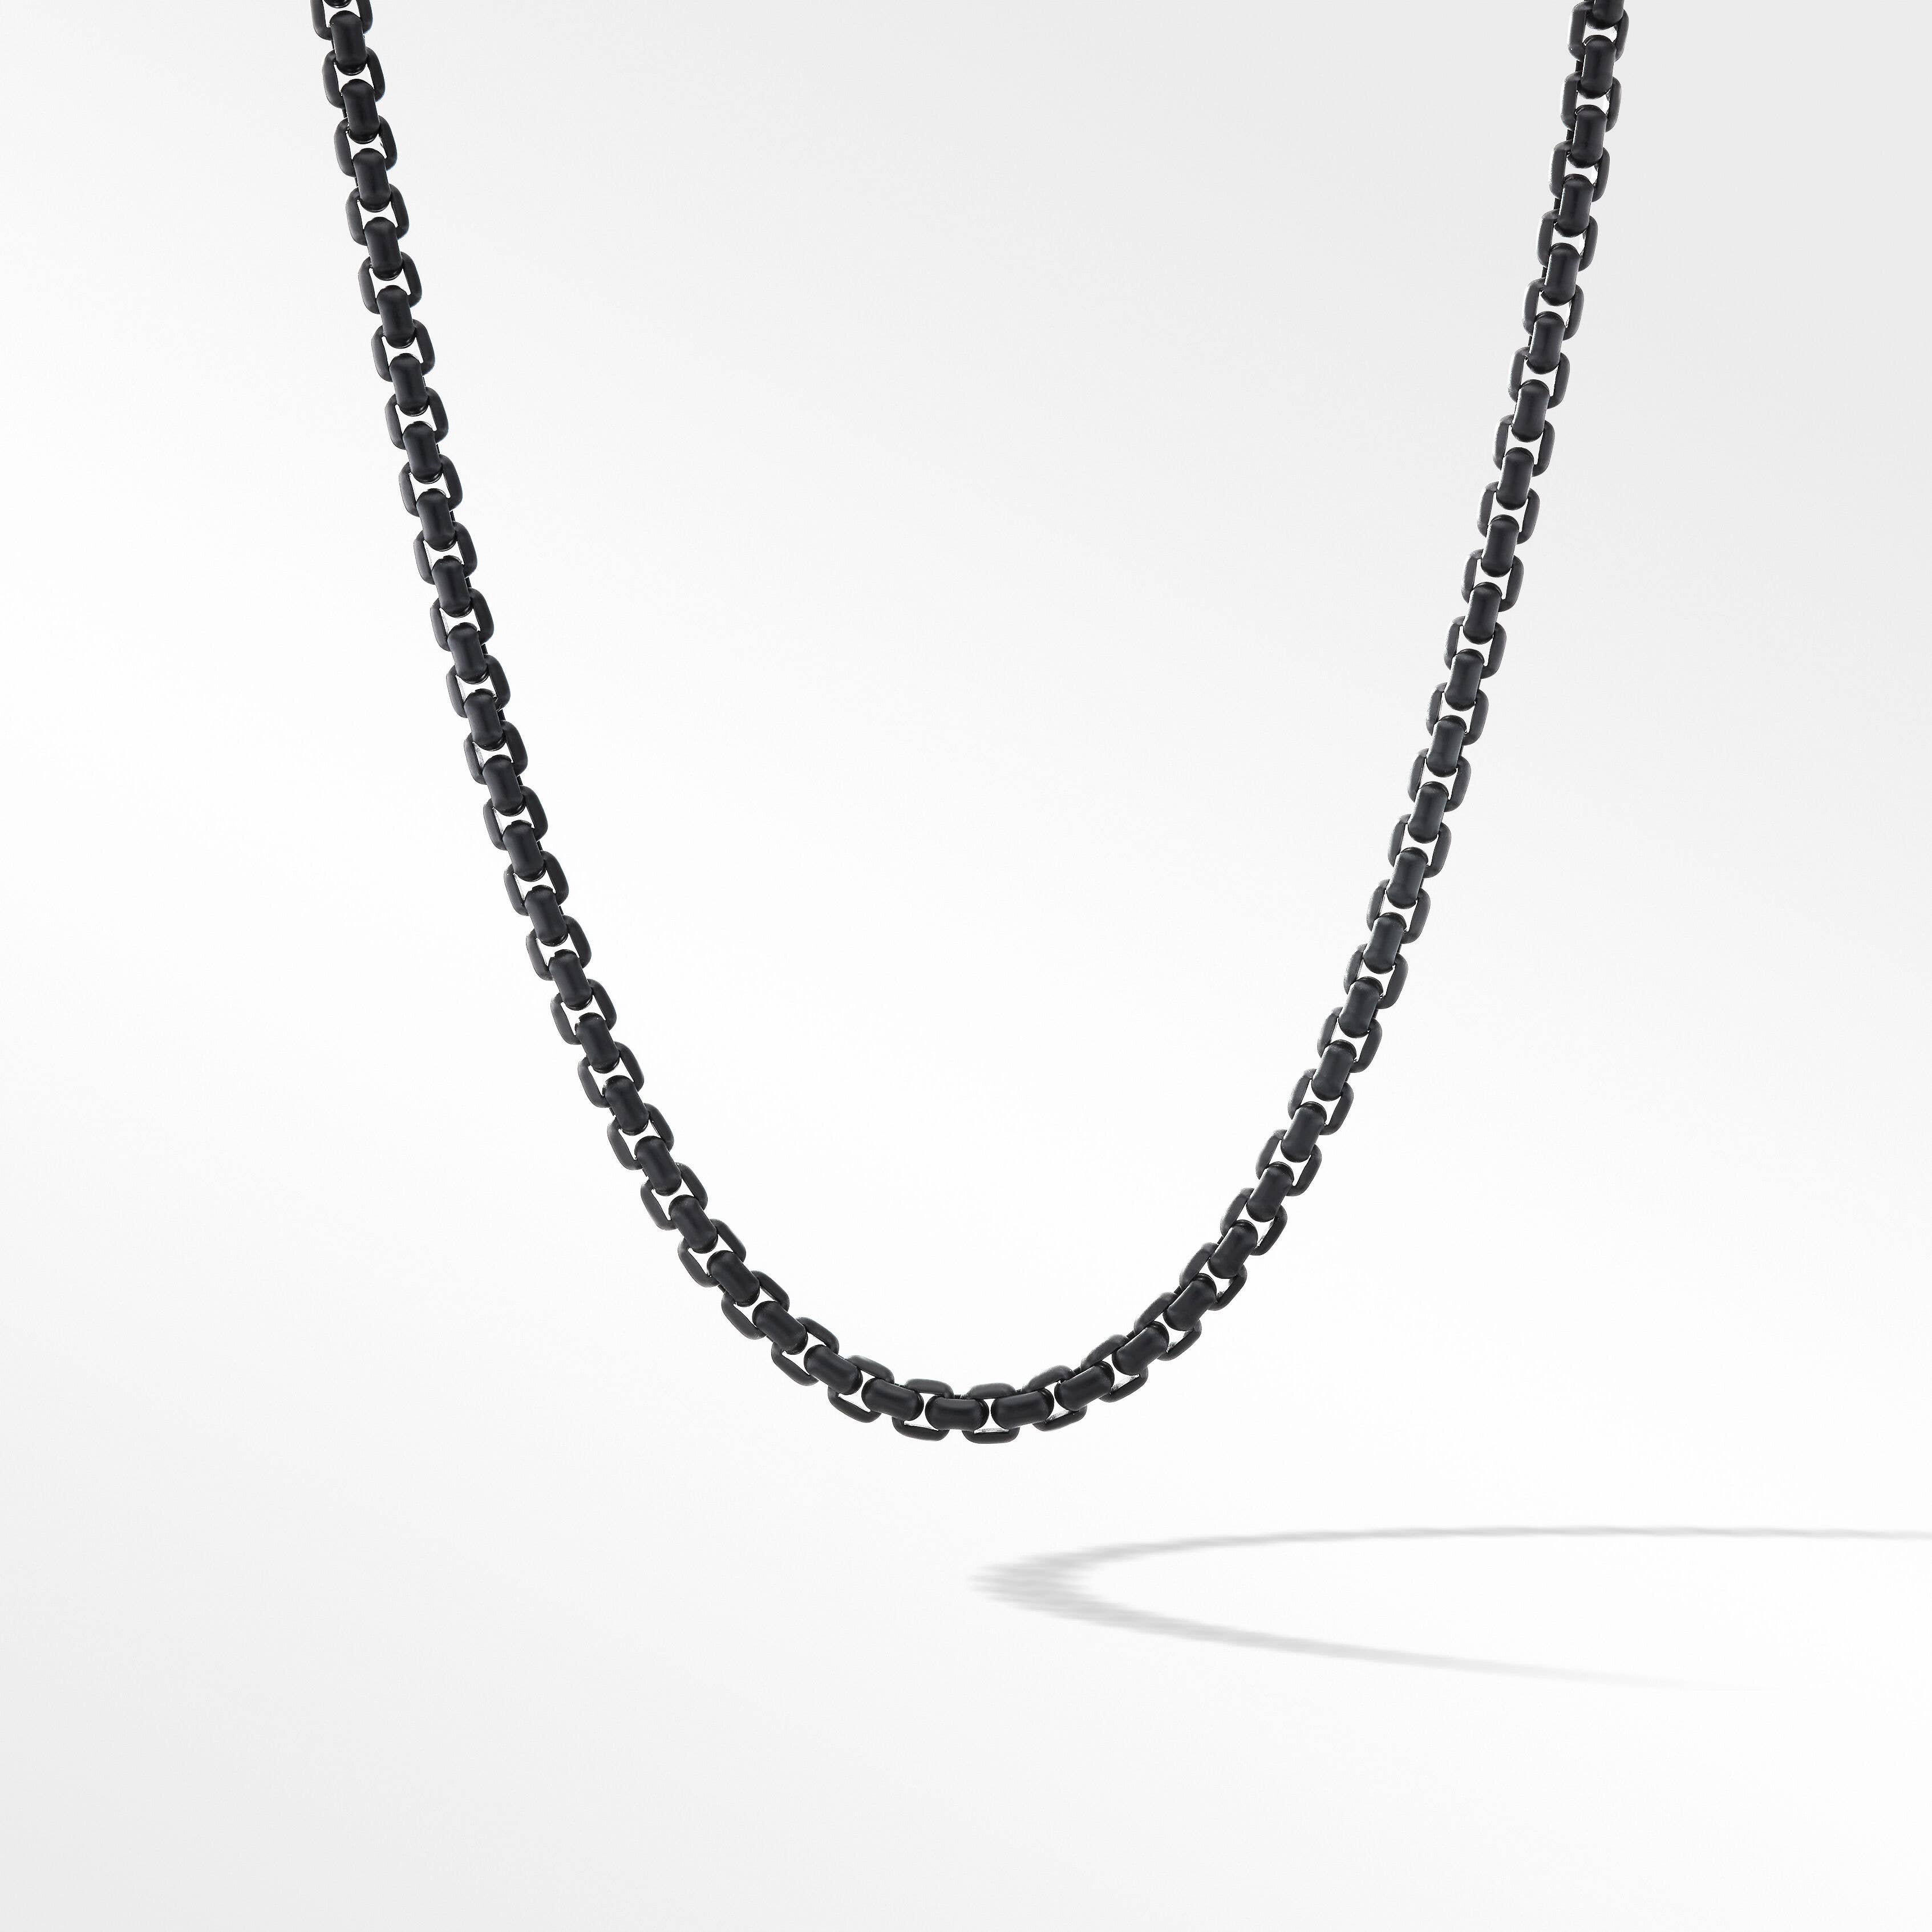 DY Bael Aire Chain Necklace in Black with 14K Yellow Gold